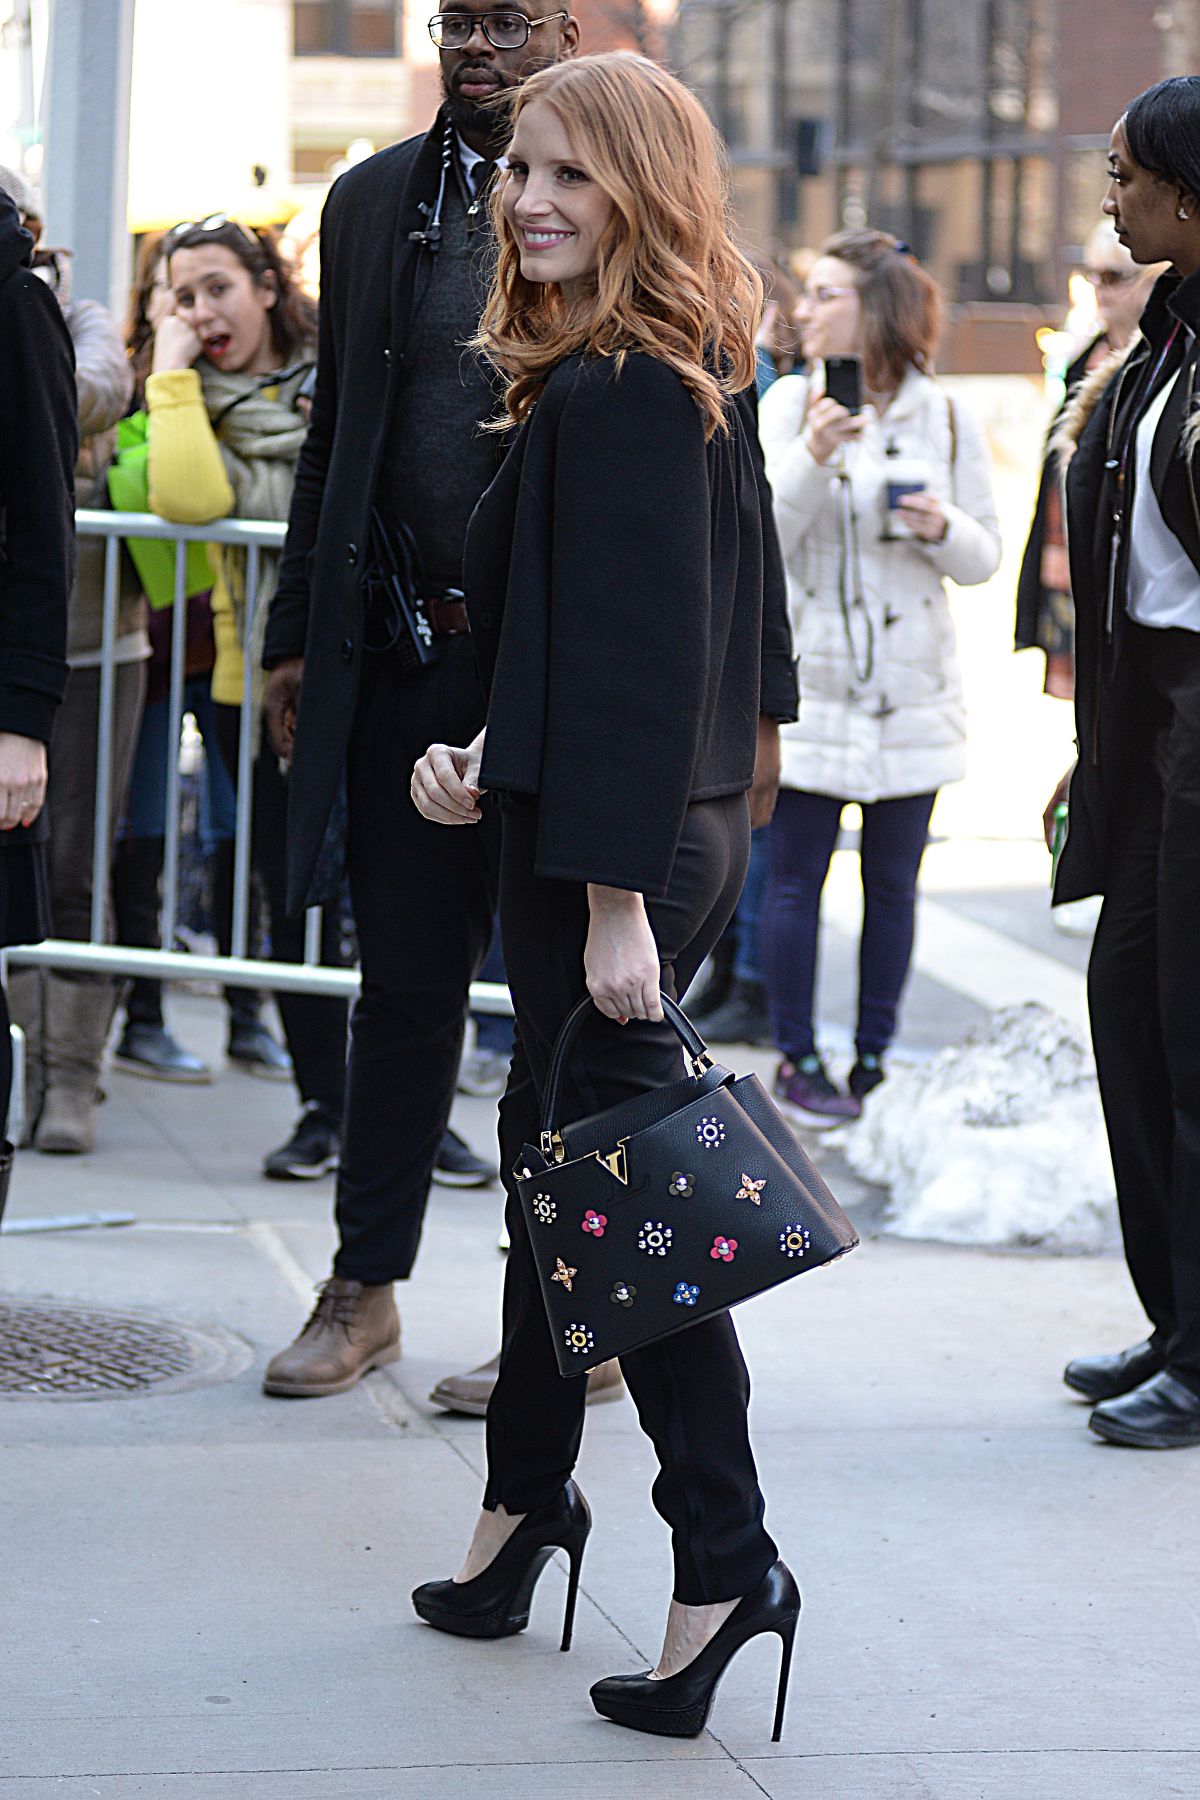 Jessica Chastain With Louis Vuitton's Capucines PM Bag in New York City